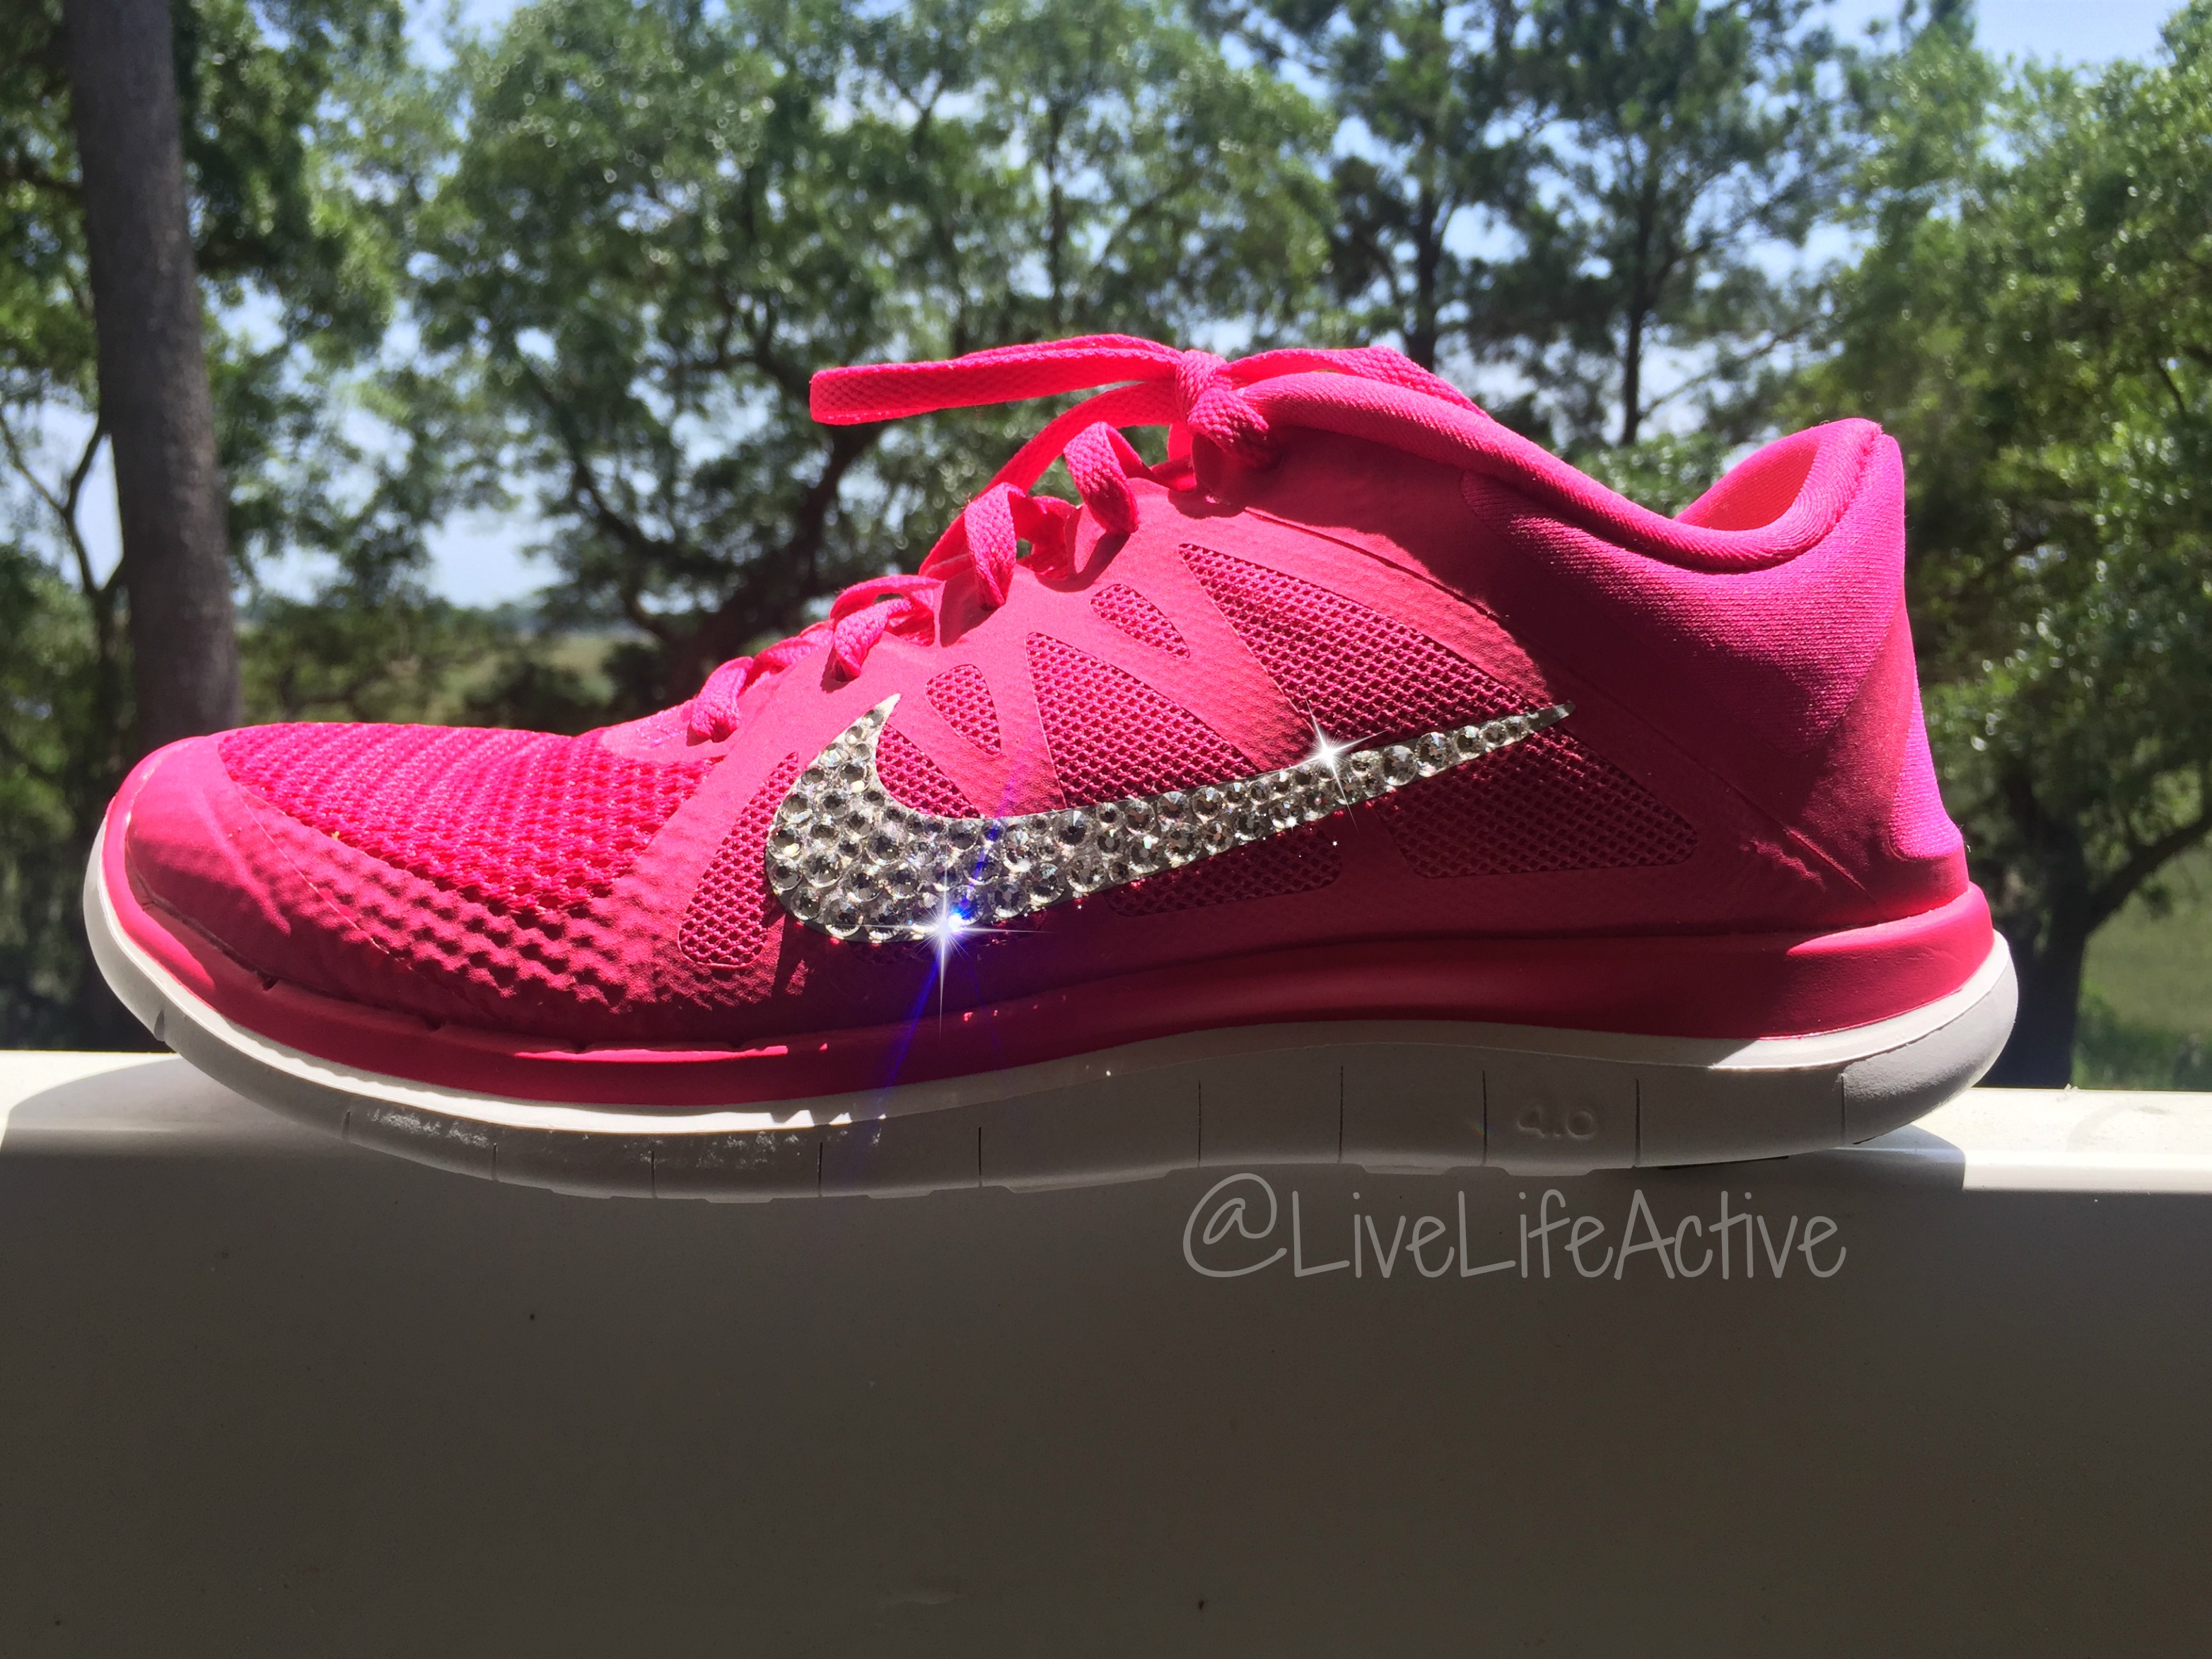 Pink Bedazzled Nike Shoes - Loving love pink & sparkles